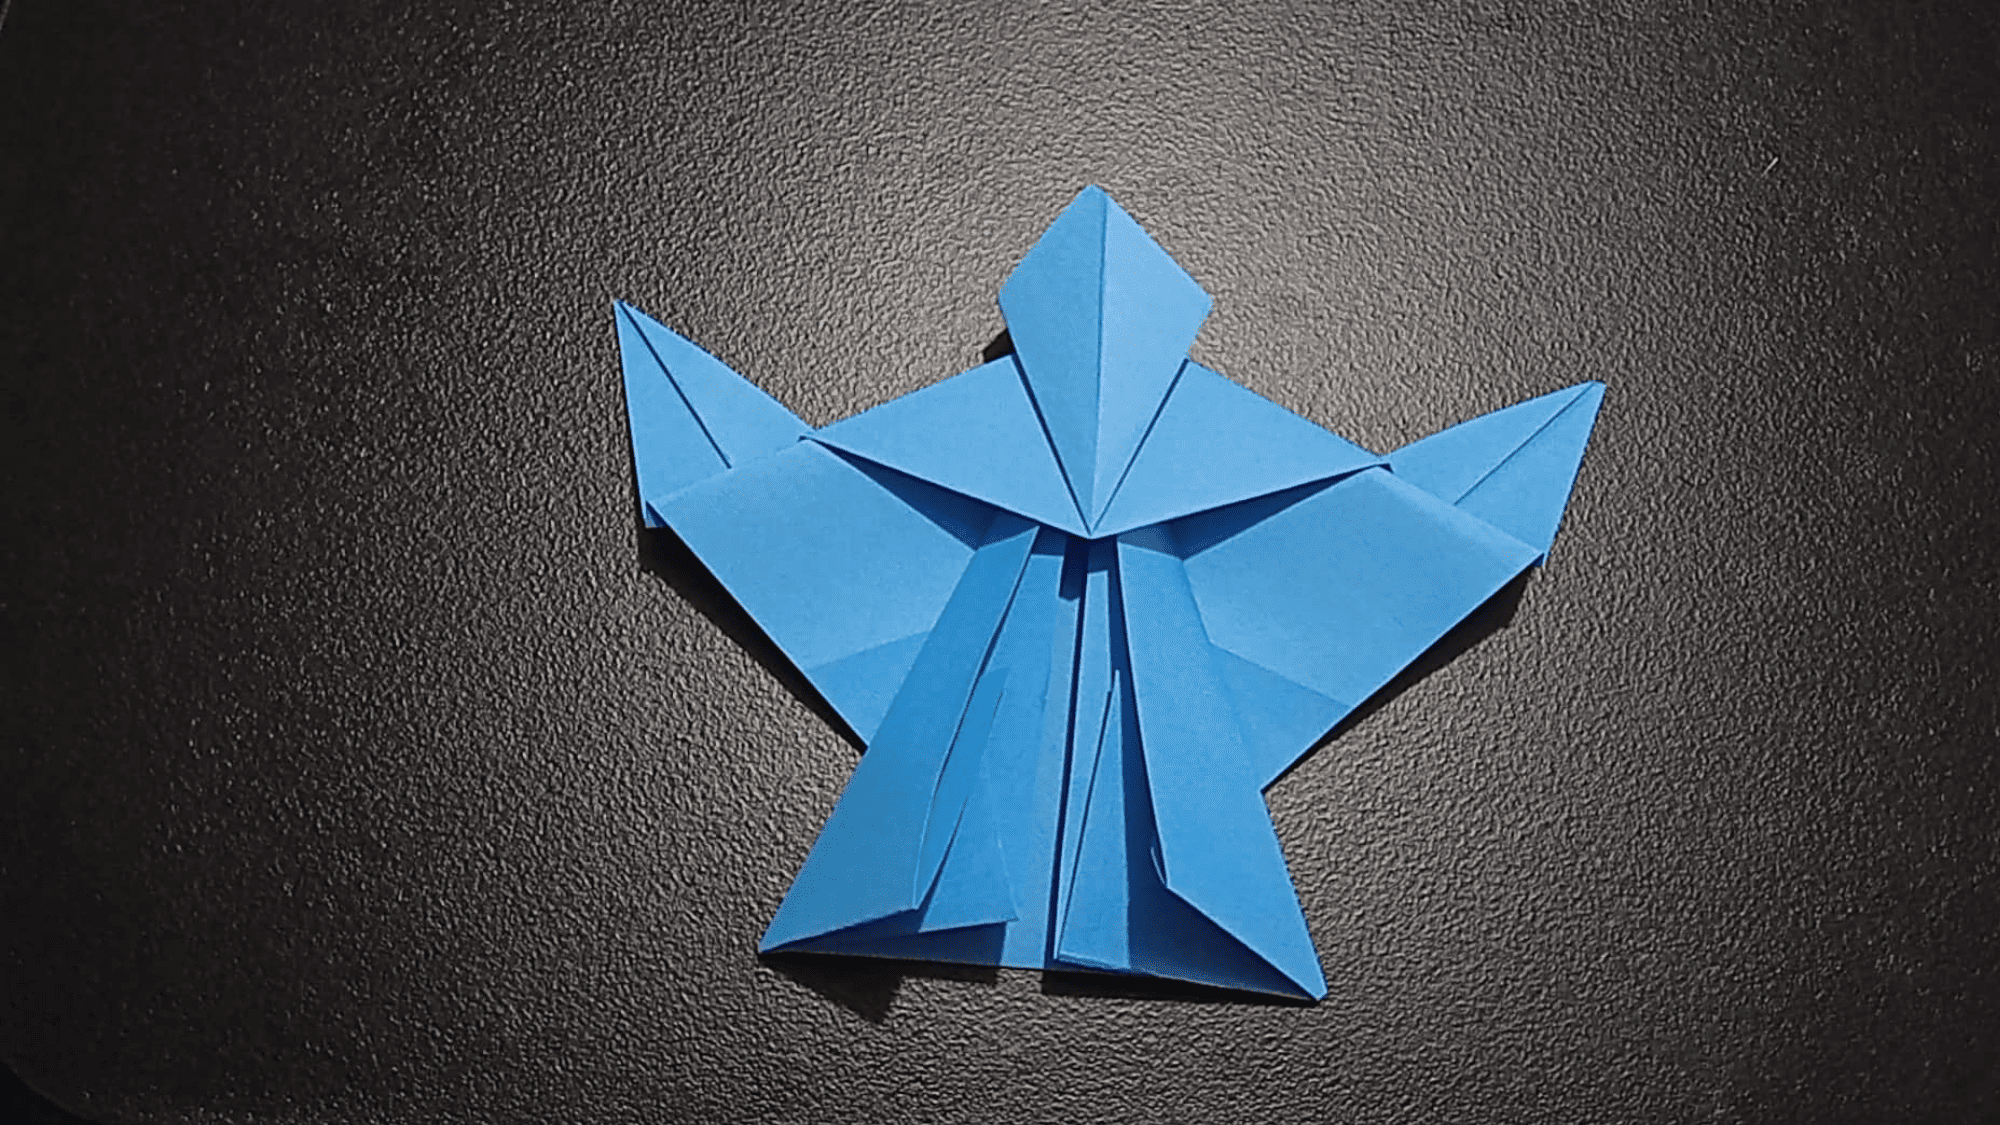 How to Make an Origami Angel Origami Angel Instructions